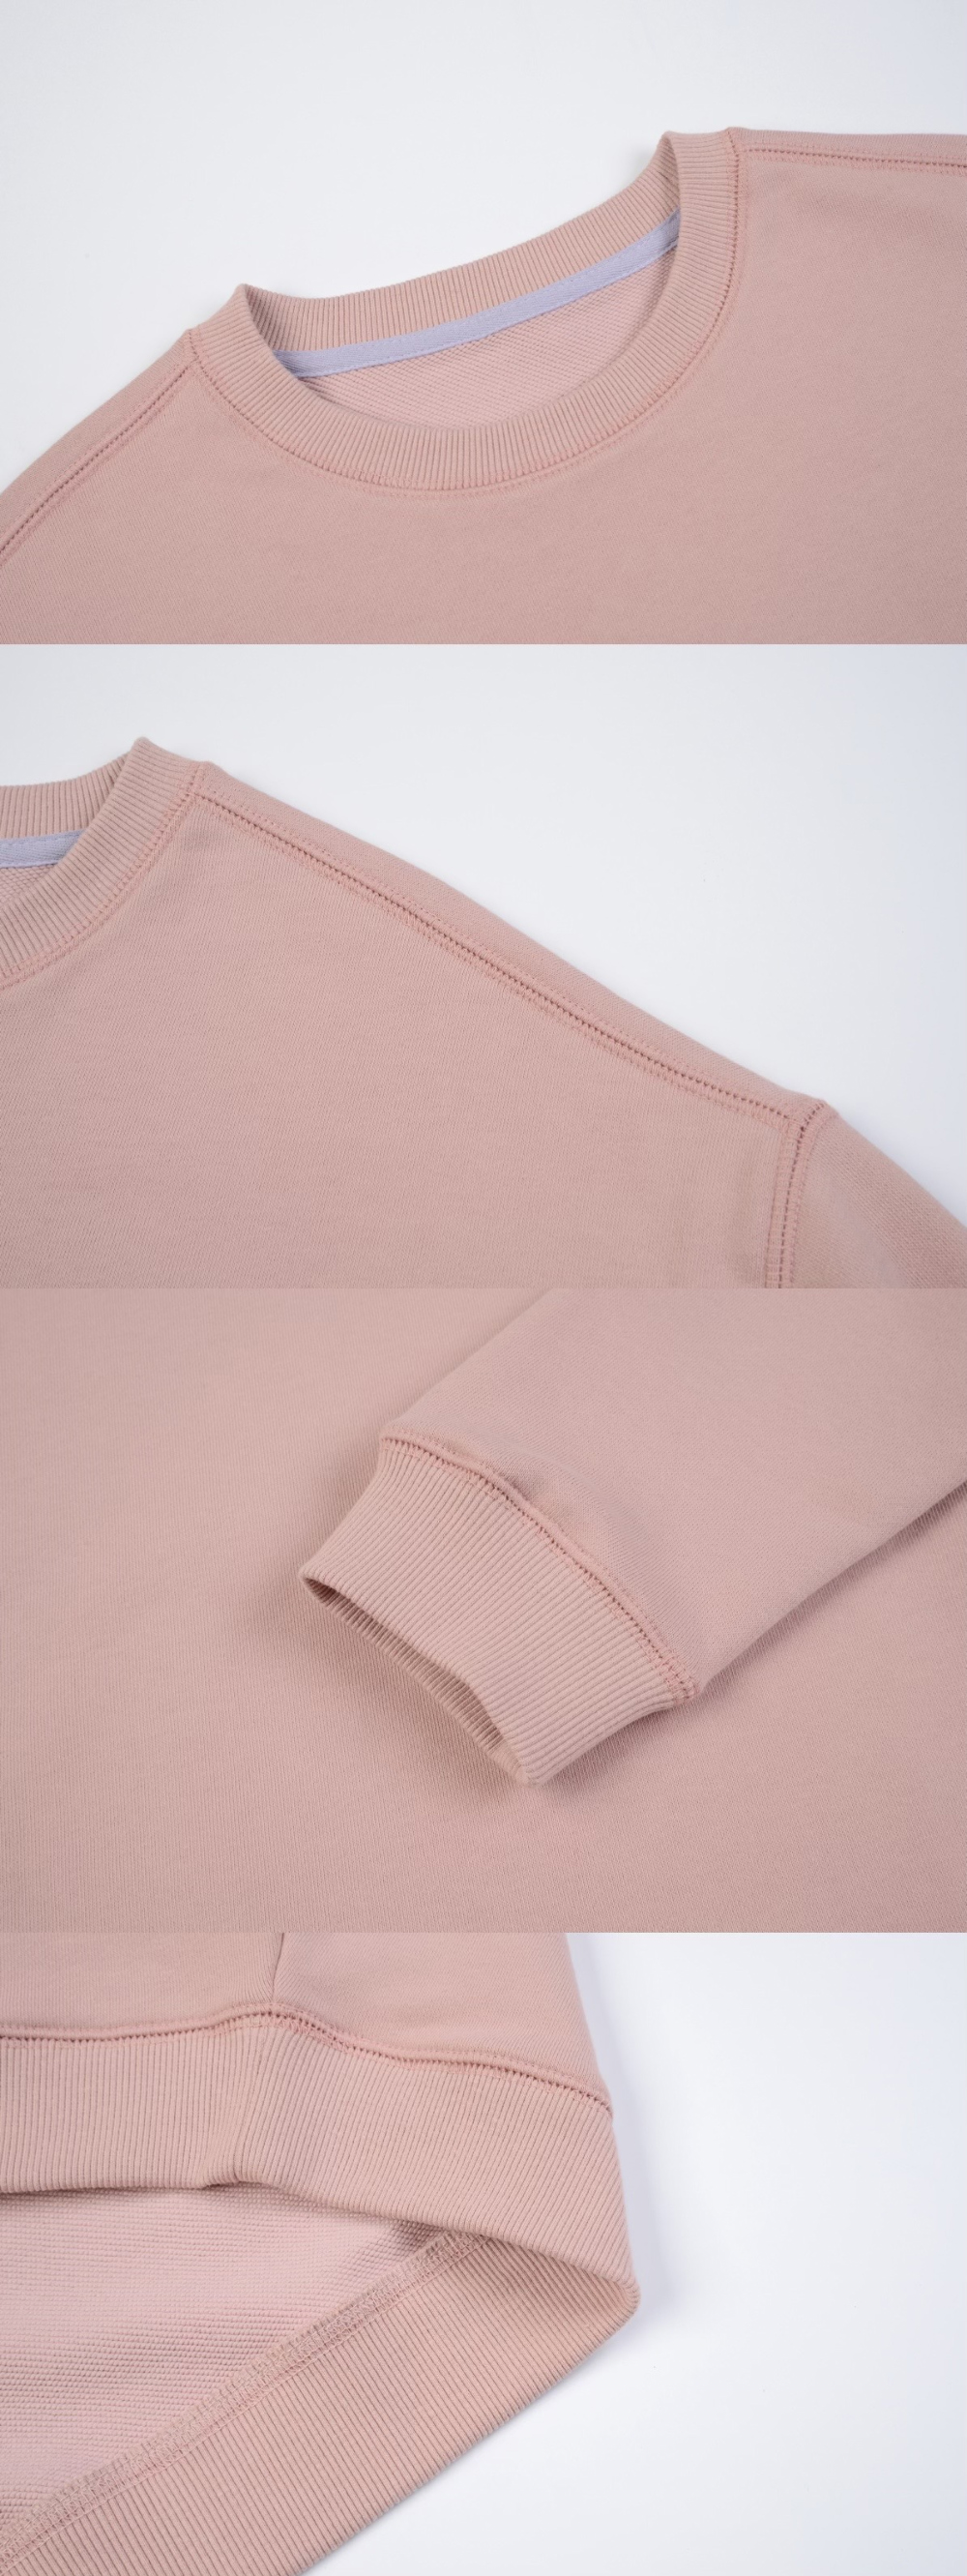 long sleeved tee detail image-S1L79